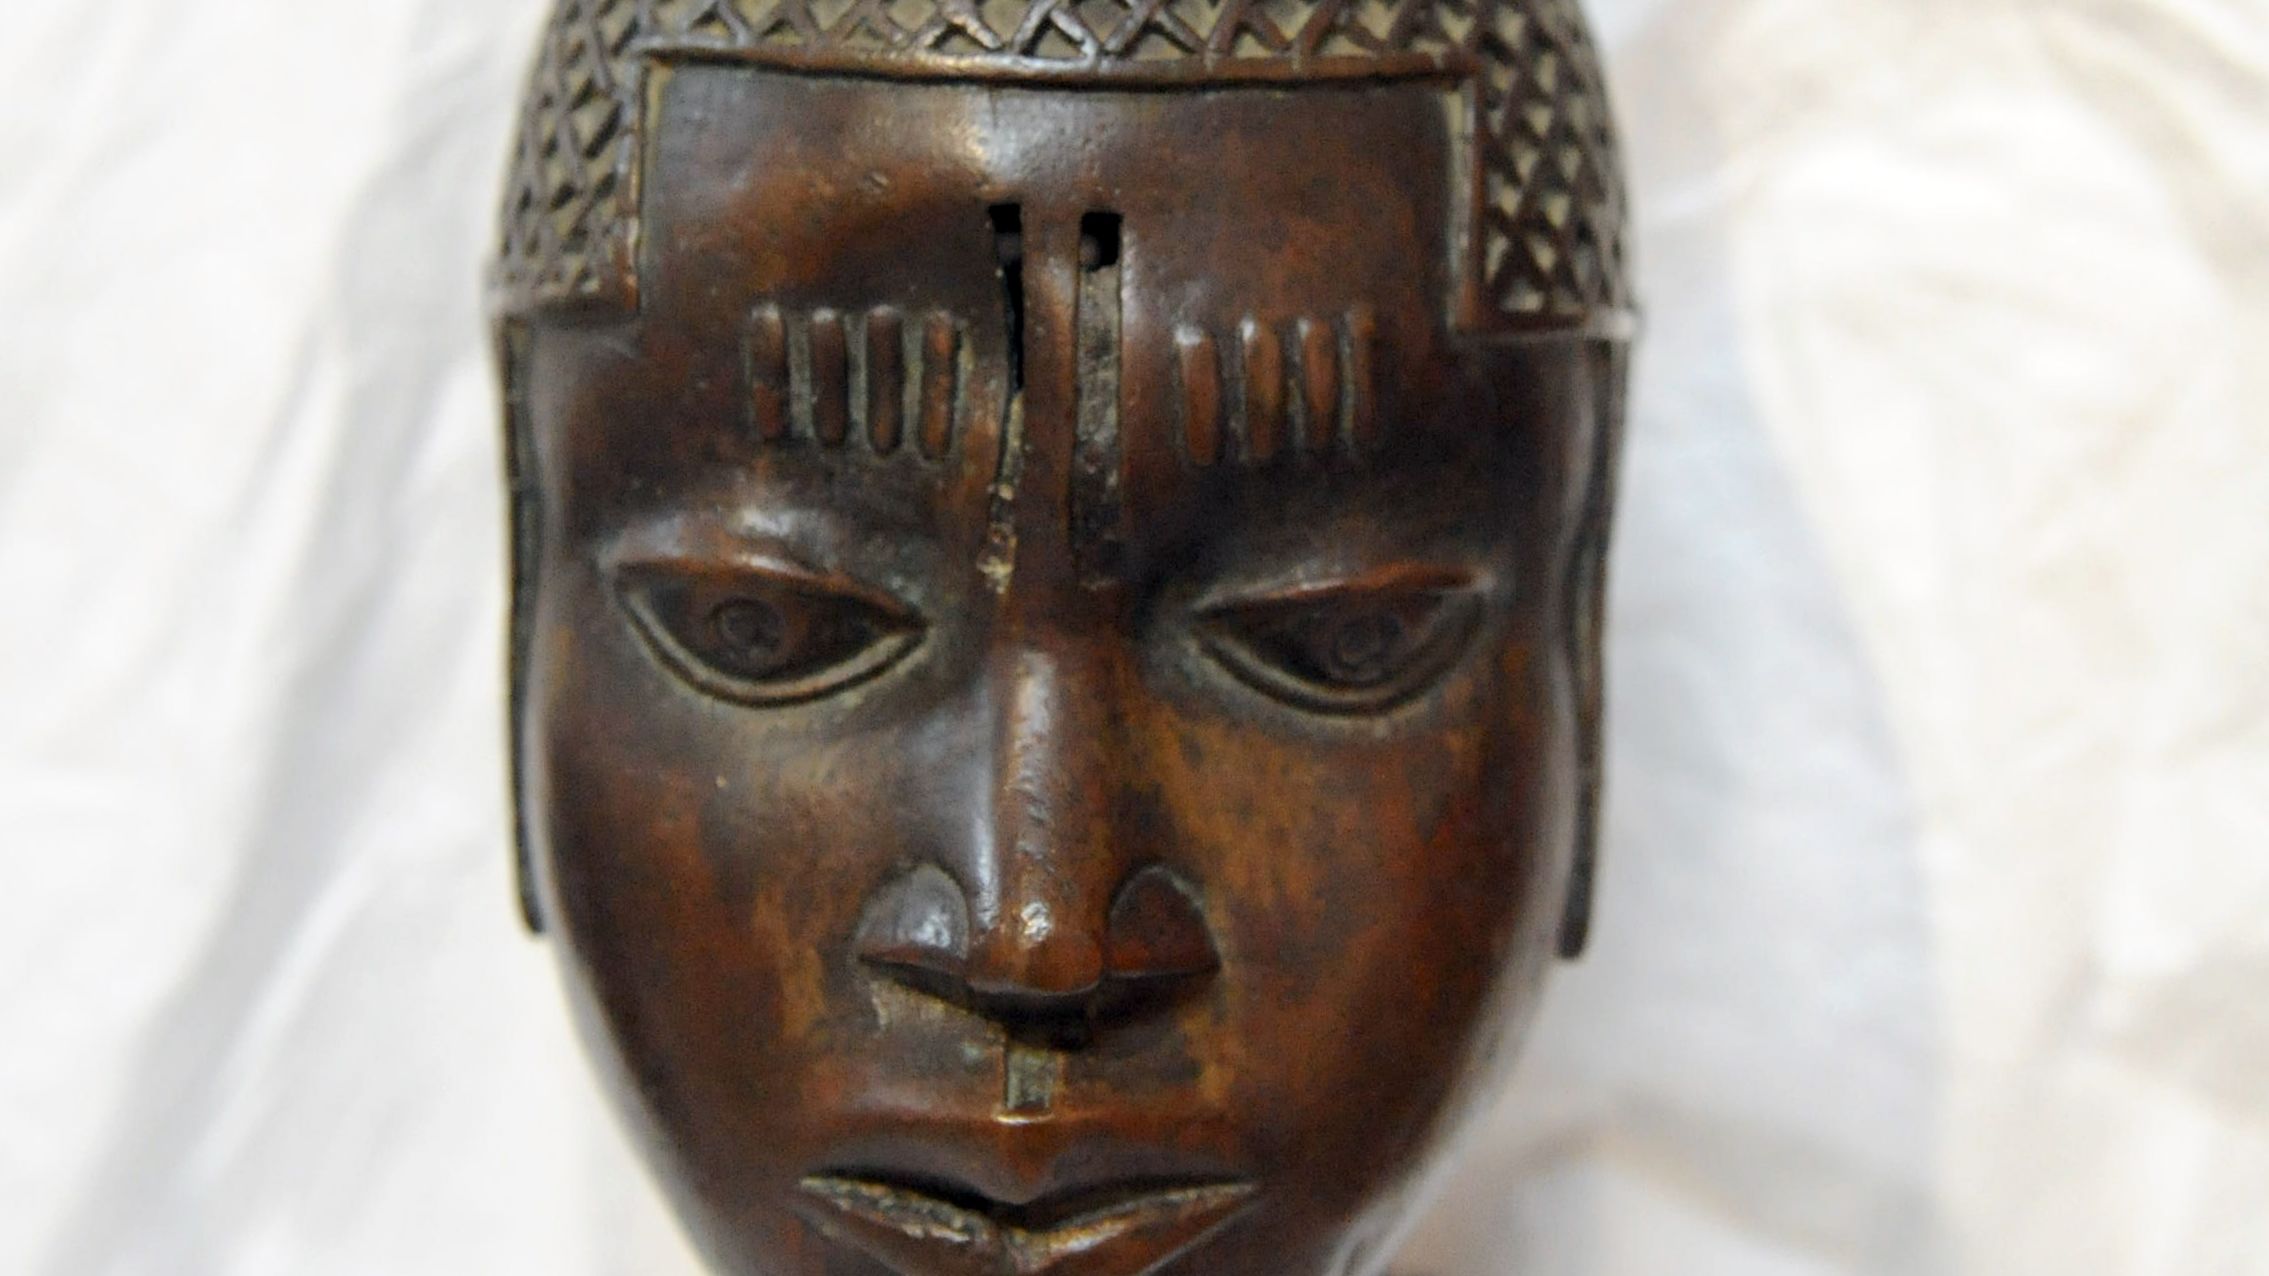 Sixteenth-Century Head of a Queen mother of Benin loan to the Royal Academy of Arts in London by the National Commission for Museums and Monuments returned to Nigeria on January 16, 2013.